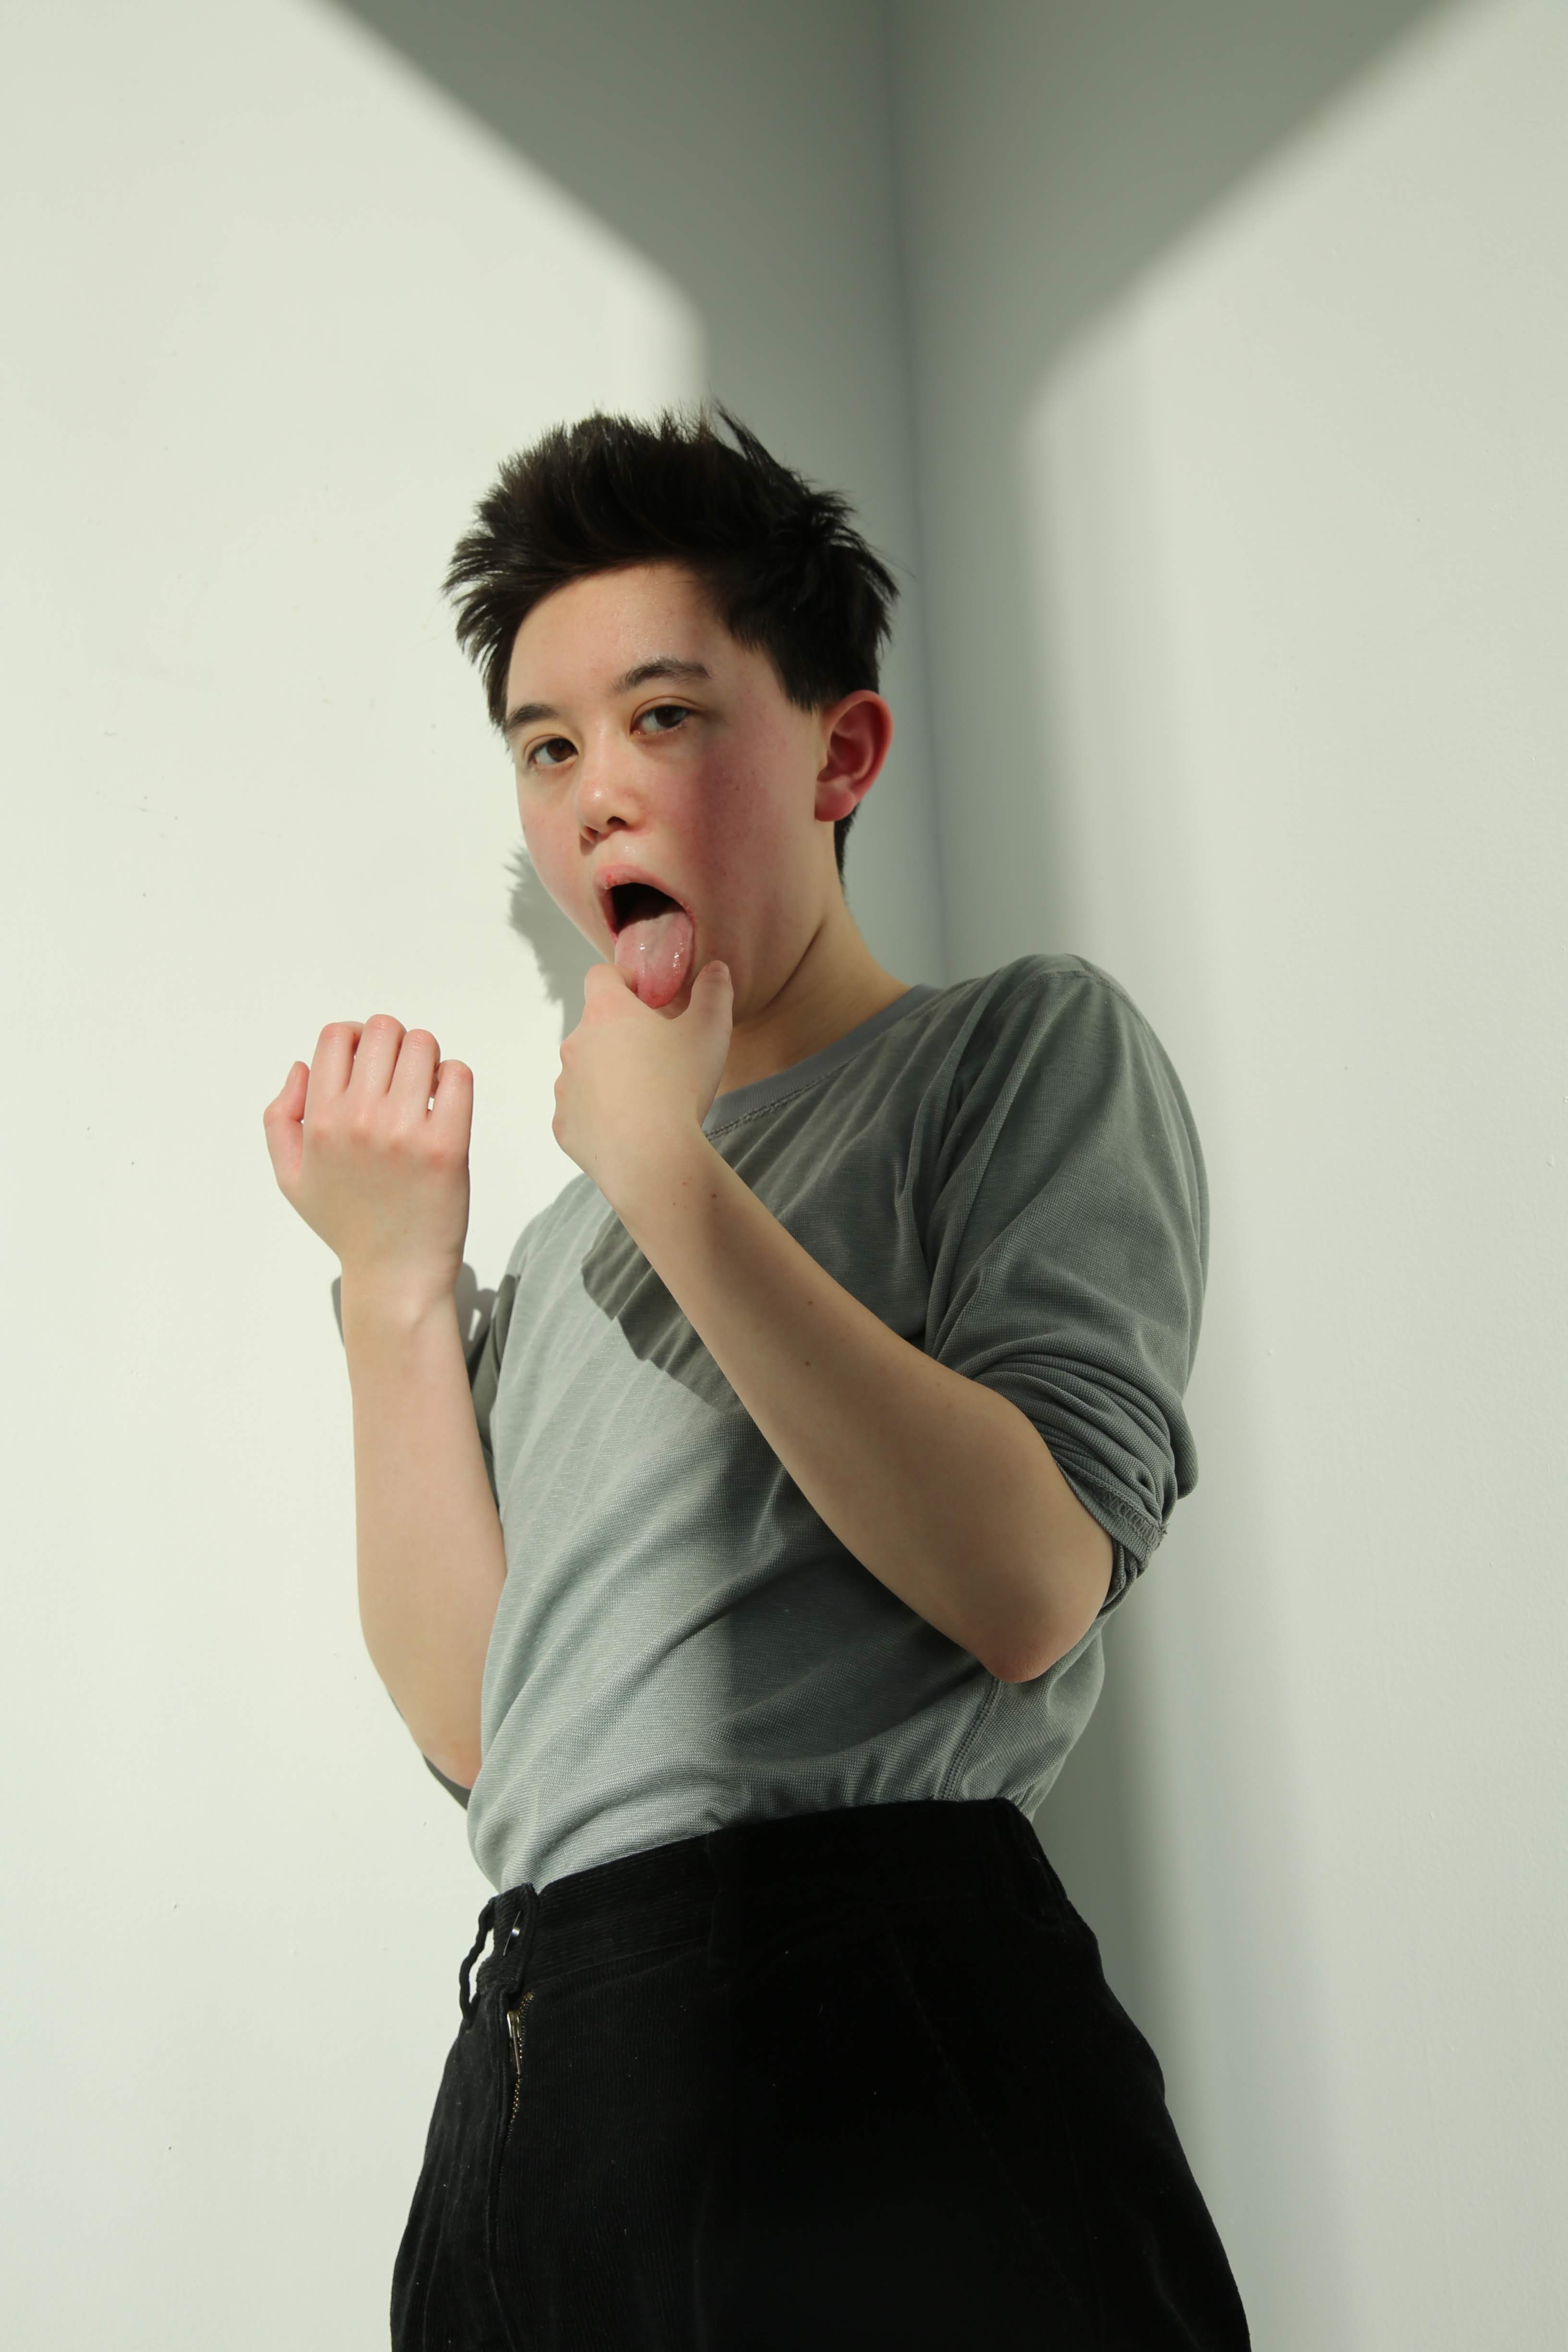 upper body photo of Noa Rui-Piin Weiss with his tongue out as he leans against a wall